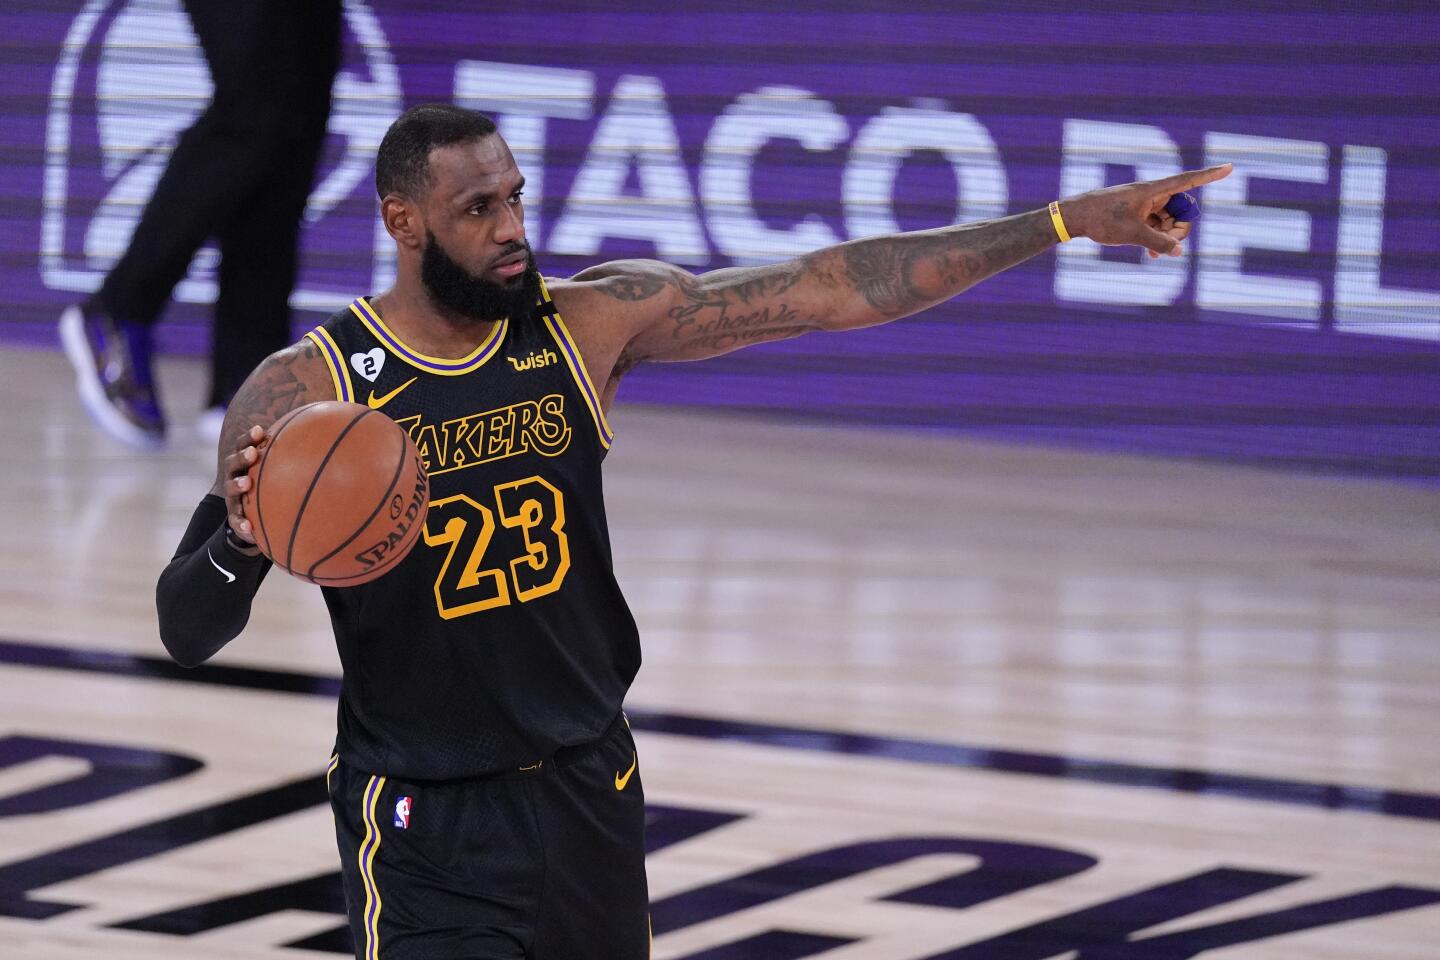 Lakers get demolished in game 2 as Dlo finished with 10pts, 8ast